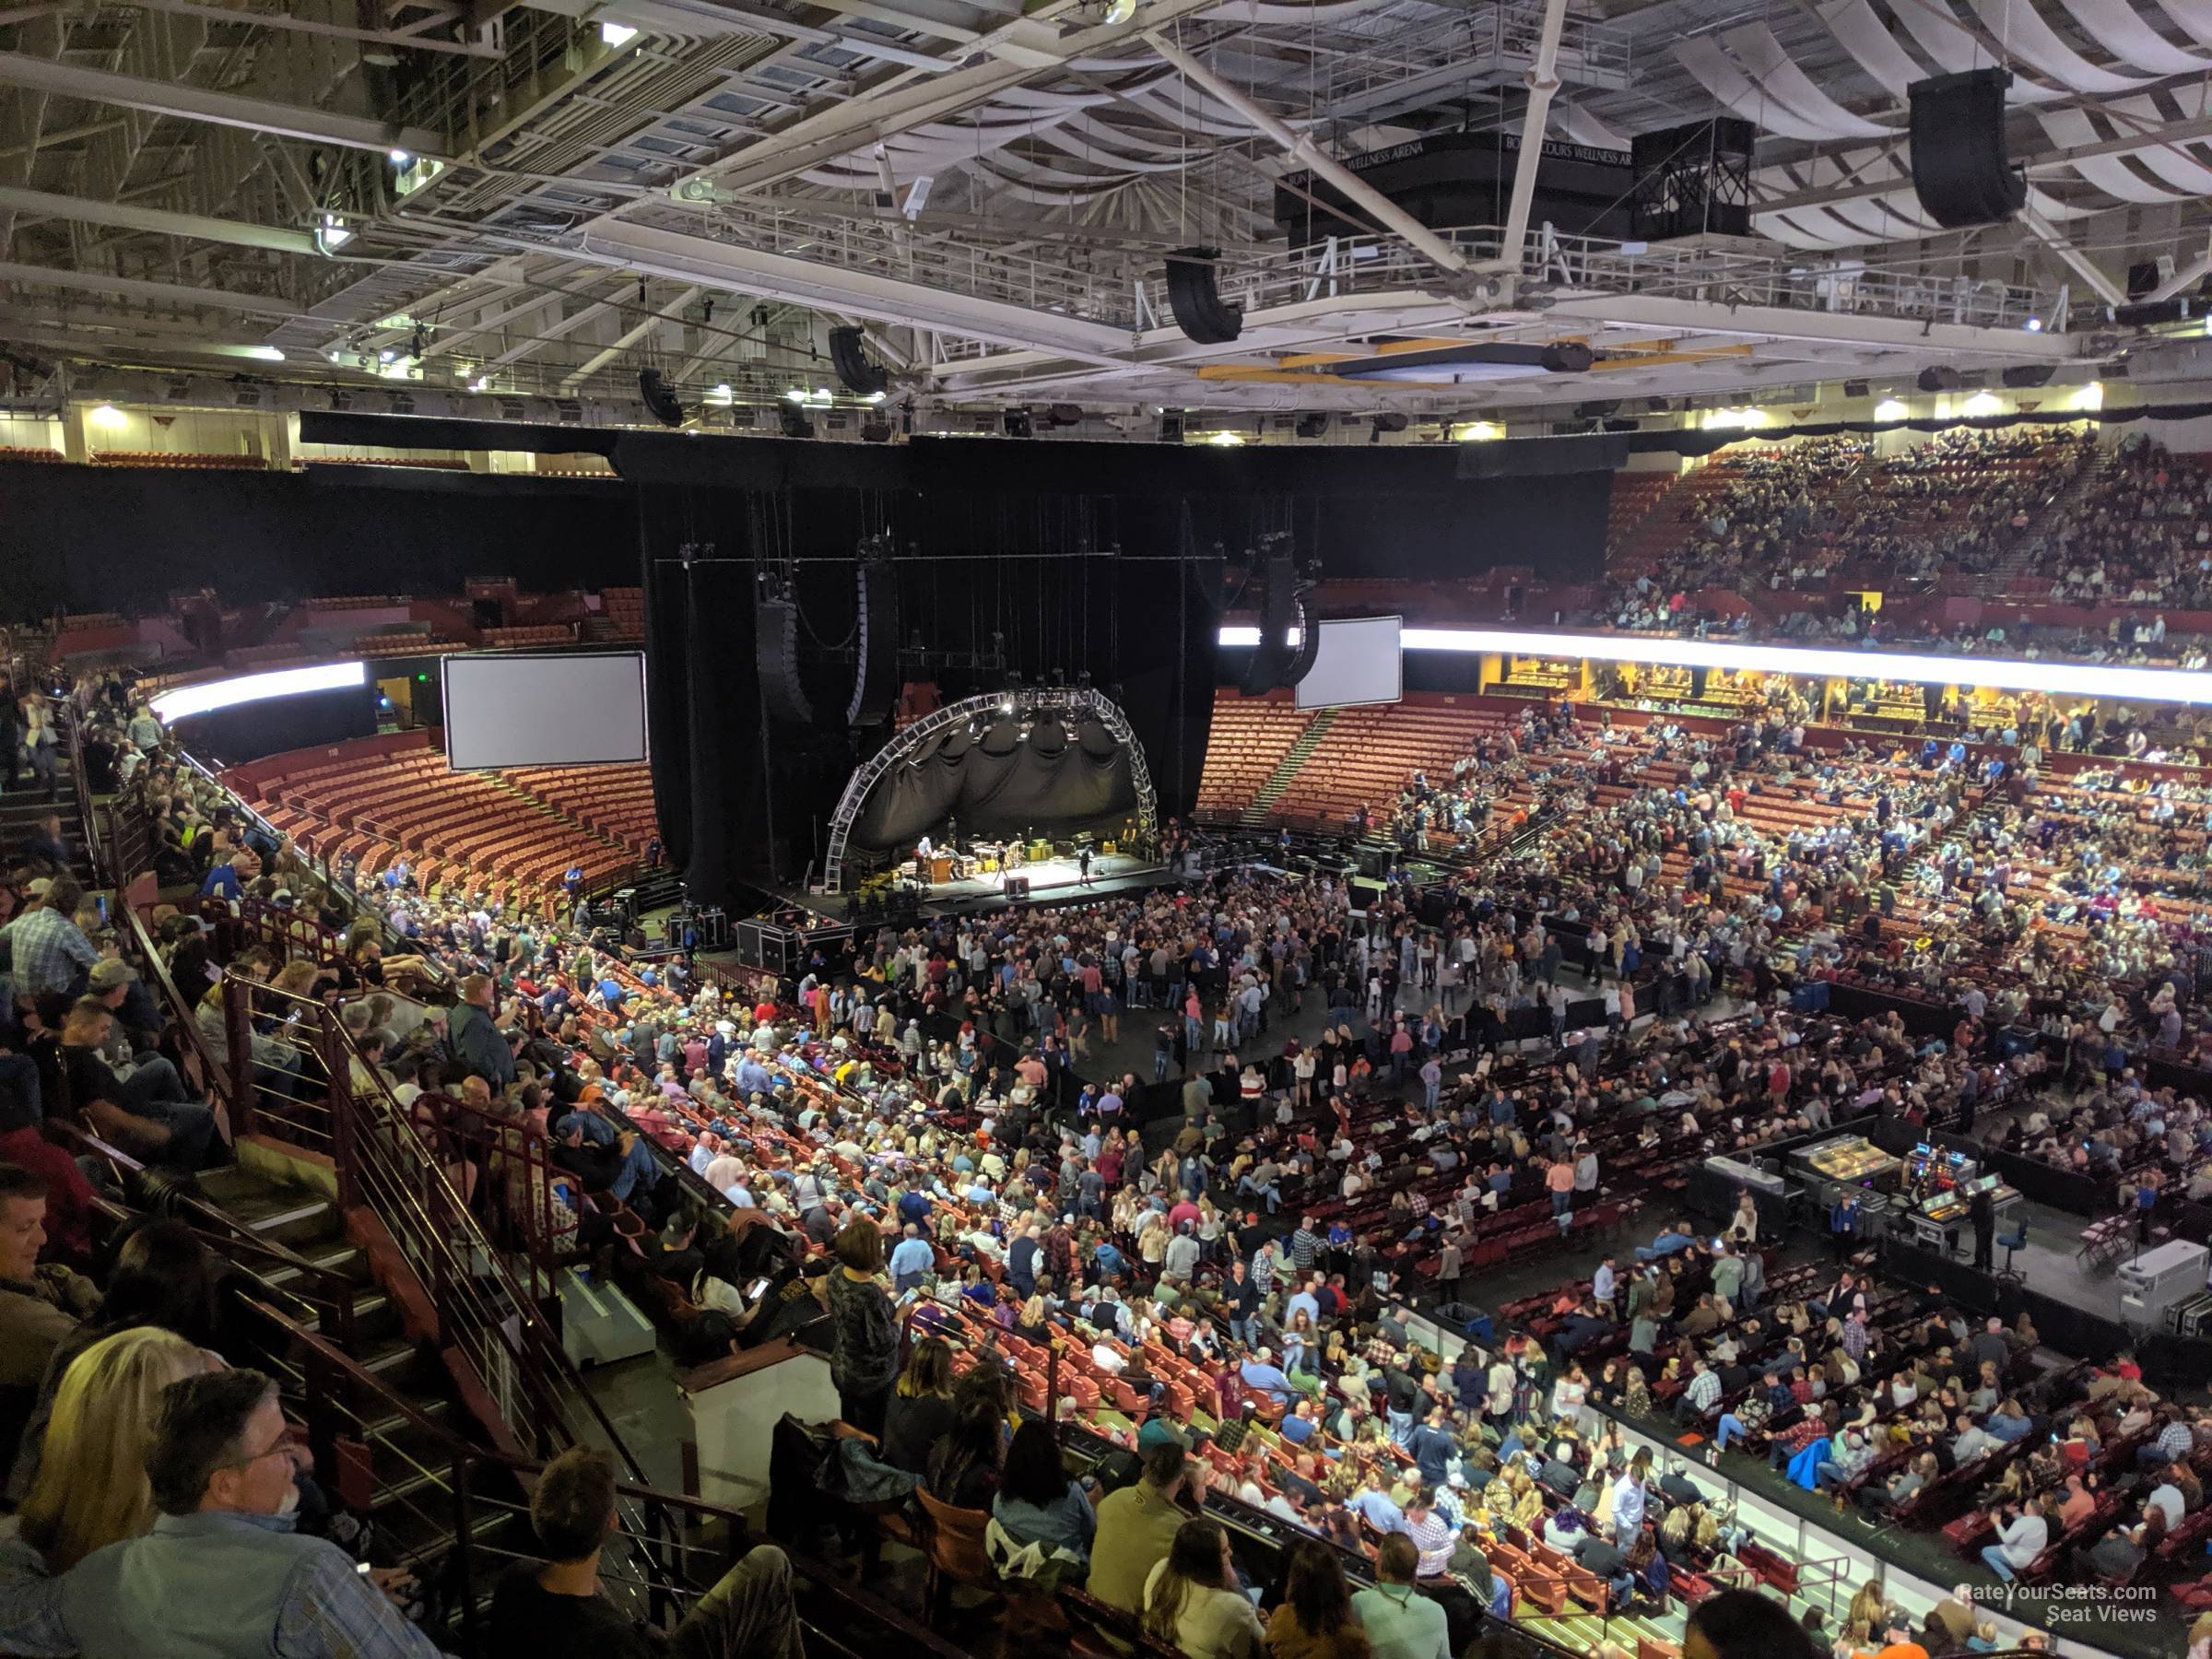 Section 224 at Bon Secours Wellness Arena for Concerts